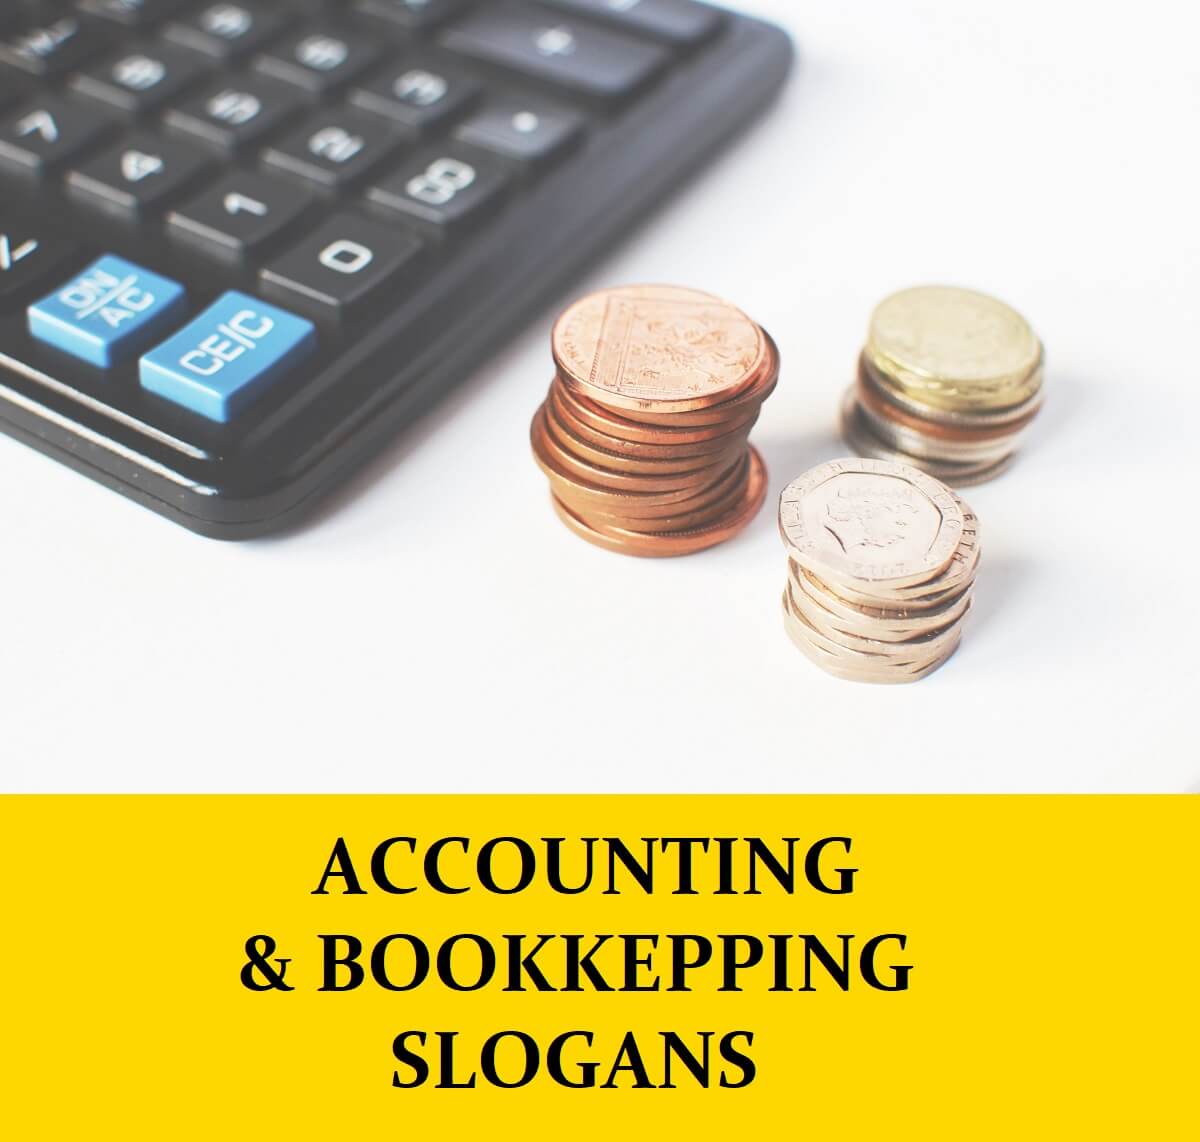 Slogans for Accounting and Bookkeeping